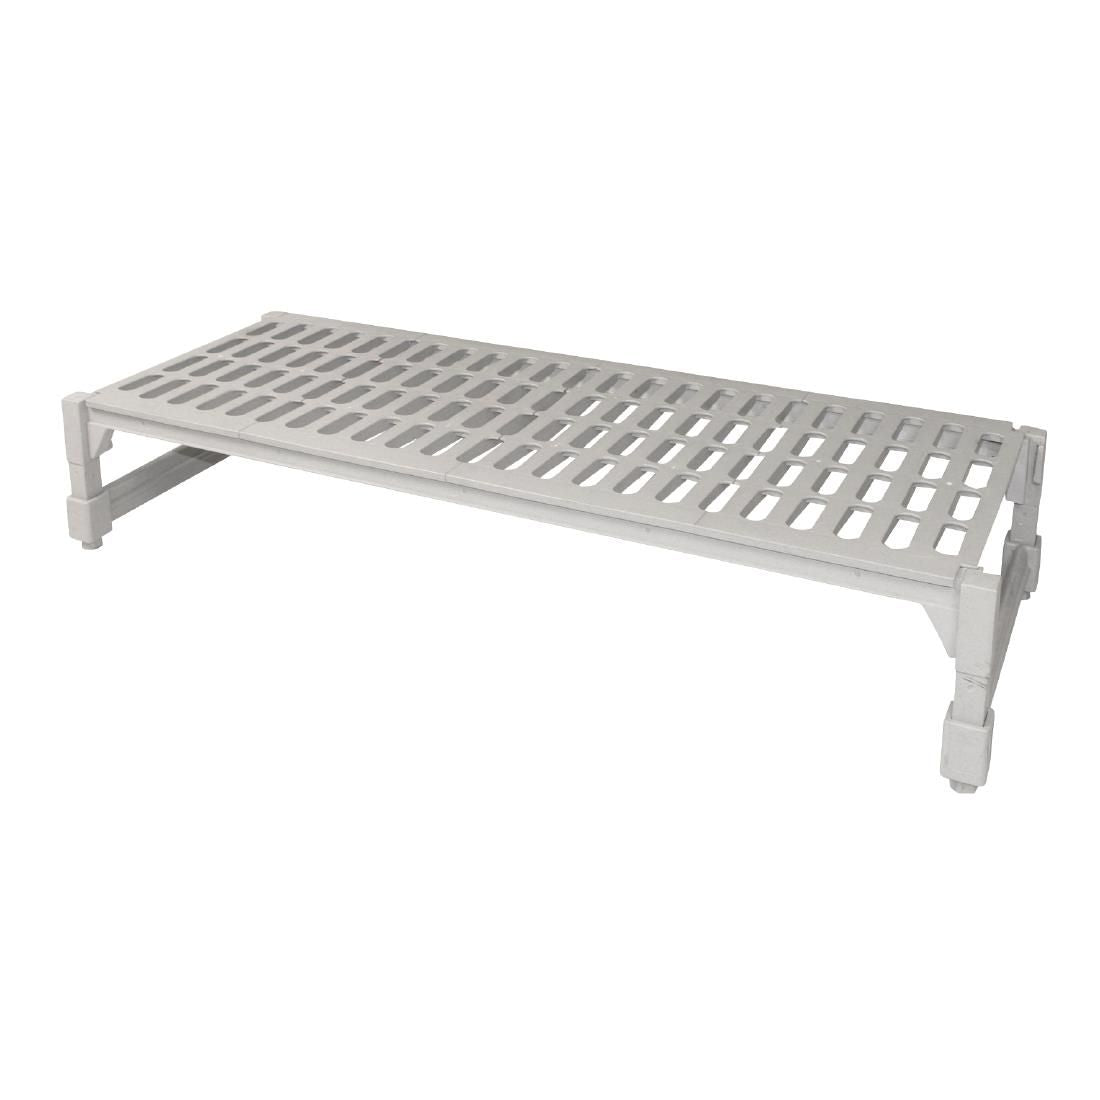 GC536 Vogue Plastic Dunnage Rack JD Catering Equipment Solutions Ltd